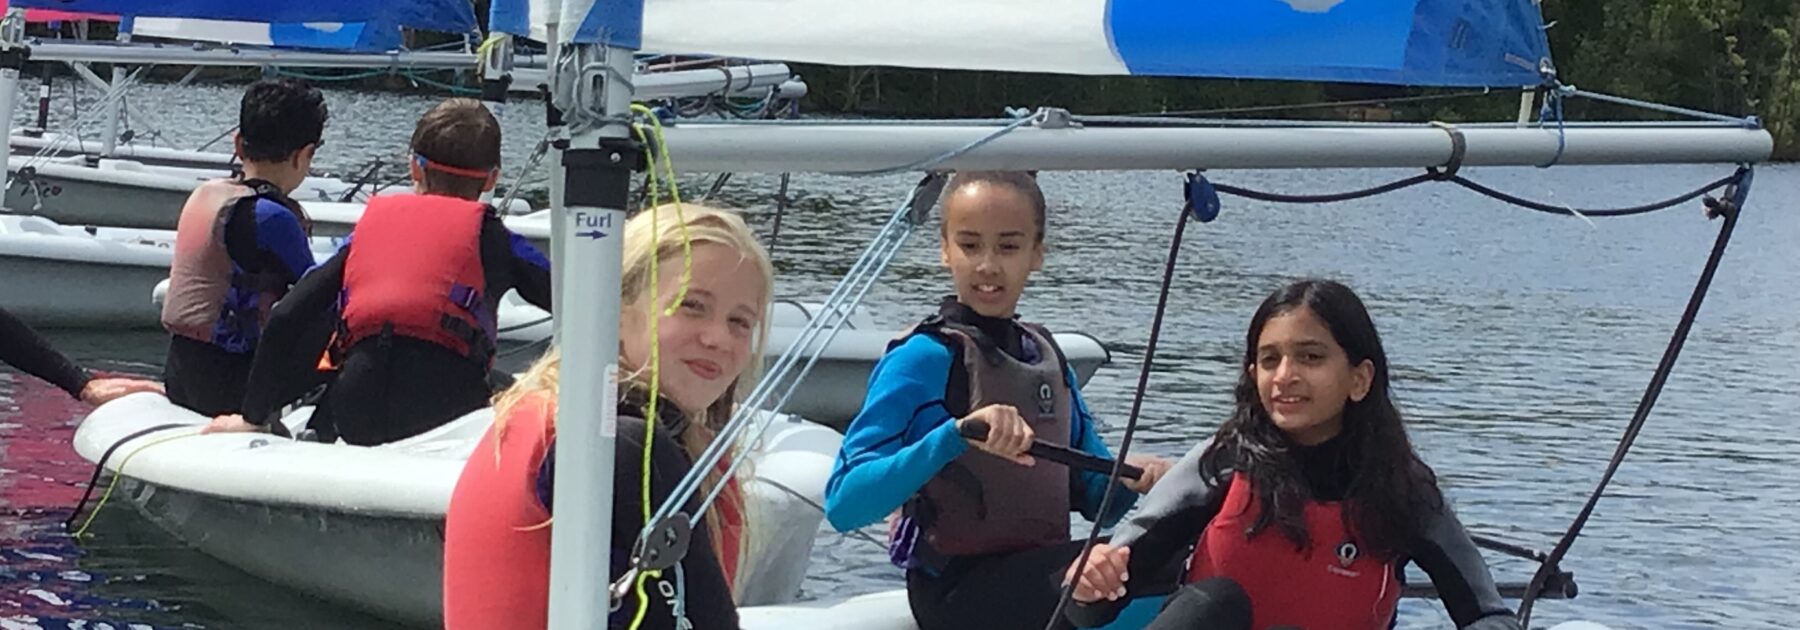 Year 6 Enjoy a Day on the Water